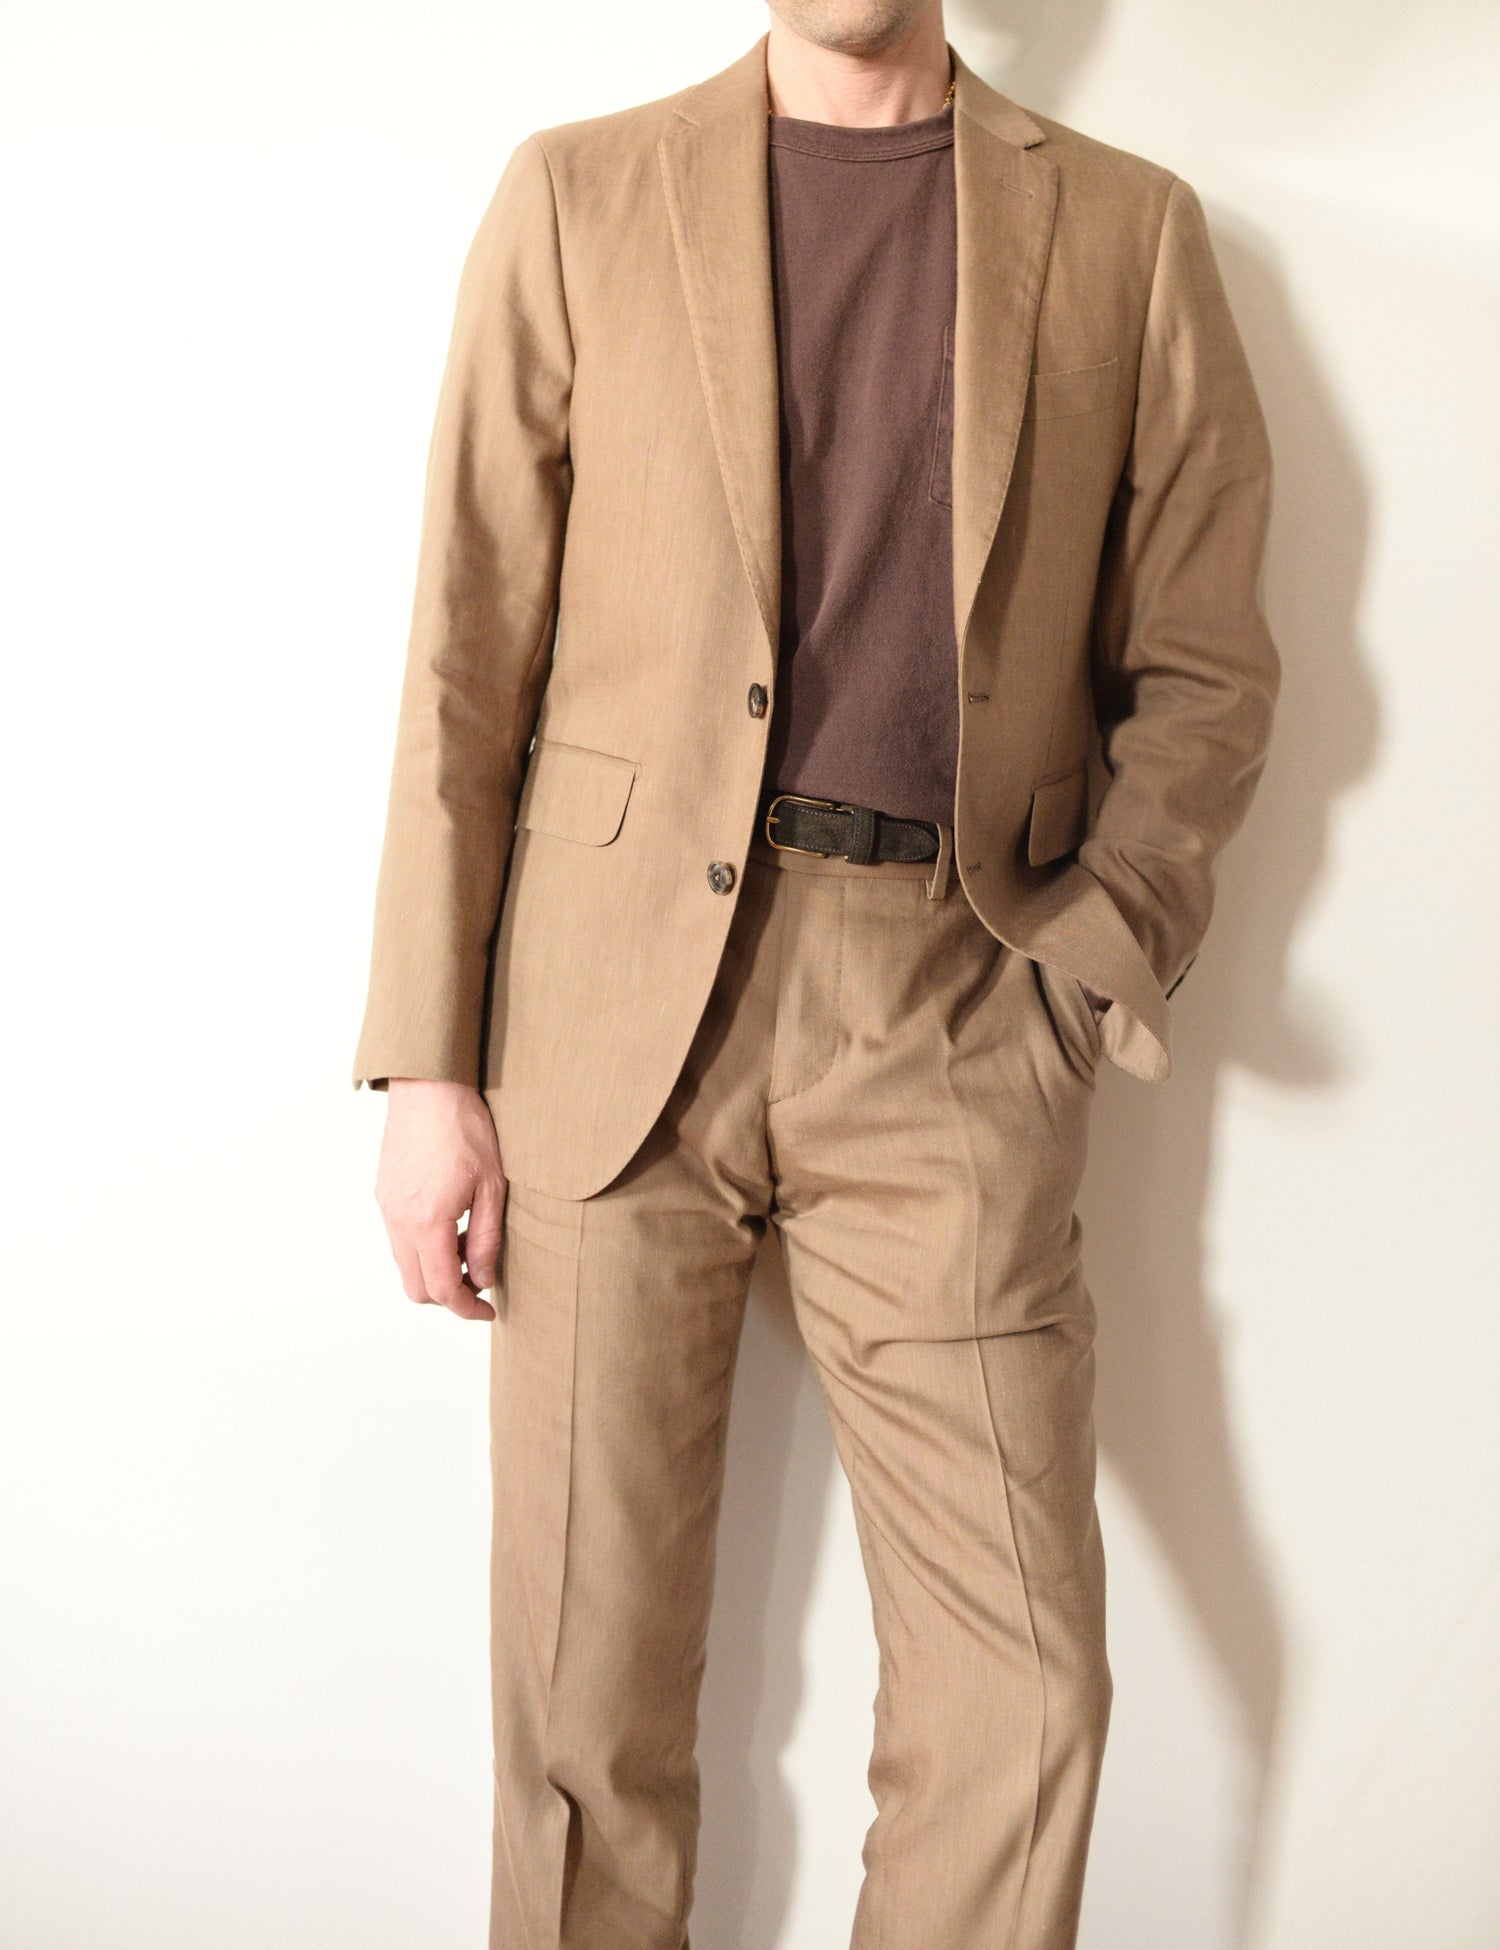 Brooklyn Tailors BKT50 Tailored Jacket in Wool Linen - Sahara on-body shot. Model is wearing jacket with matching trouser, brown t-shirt, and brown belt. 